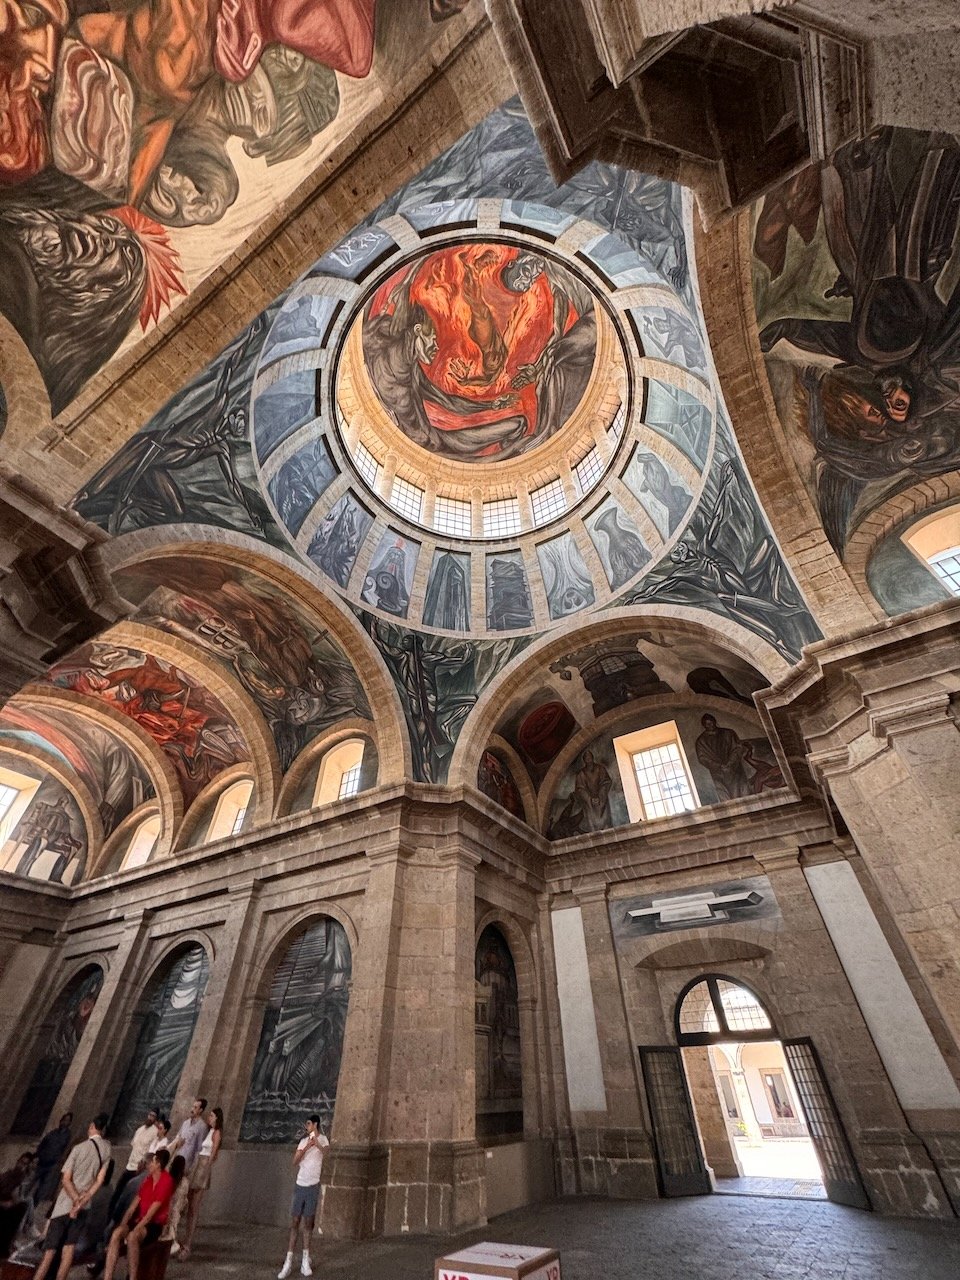 ornate ceiling with Orozco murals